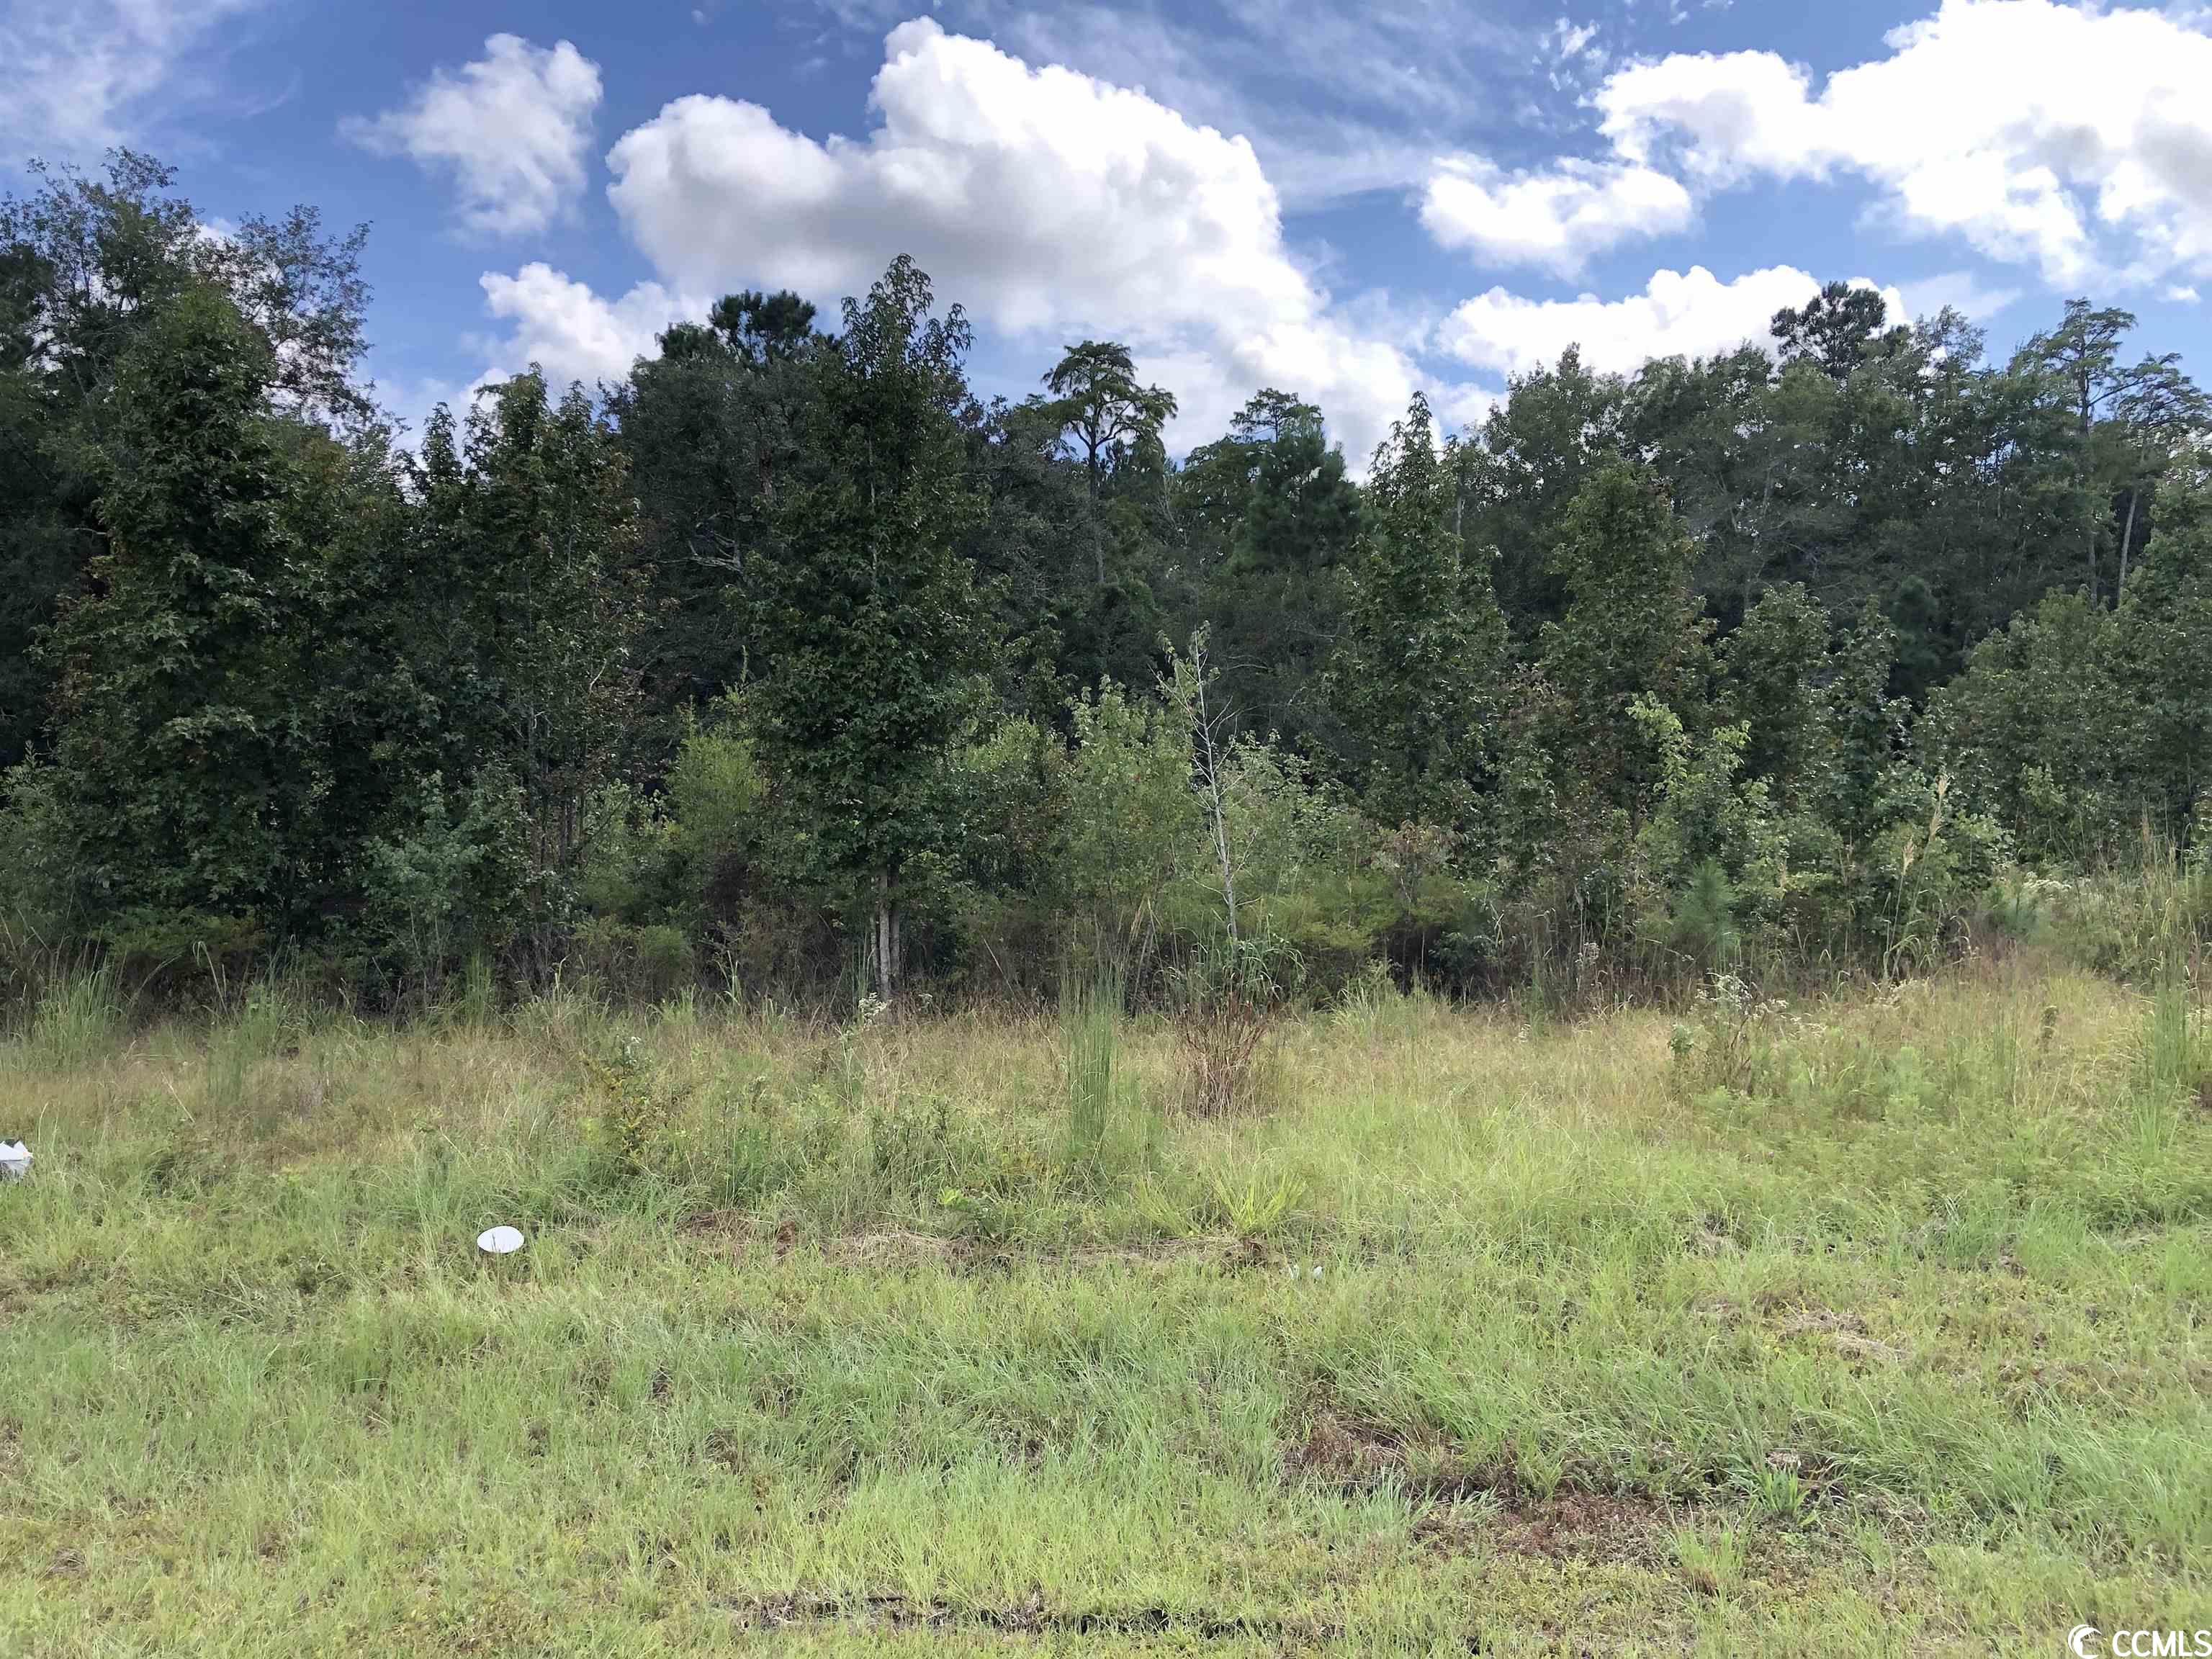 build your perfect home or put your mobile home on this 1+ acre lot in conway.  it is in a flood zone but has public water and would require an engineered septic system.  this would cost approximately 8500.00 and would be done by an engineering company.  it is buyers responsibility to verify thes cost. this neighborhood is very quiet and the beach is only 15 minutes or so away.  if you like the river a county maintained boat landing is only about 1/2 mile away.